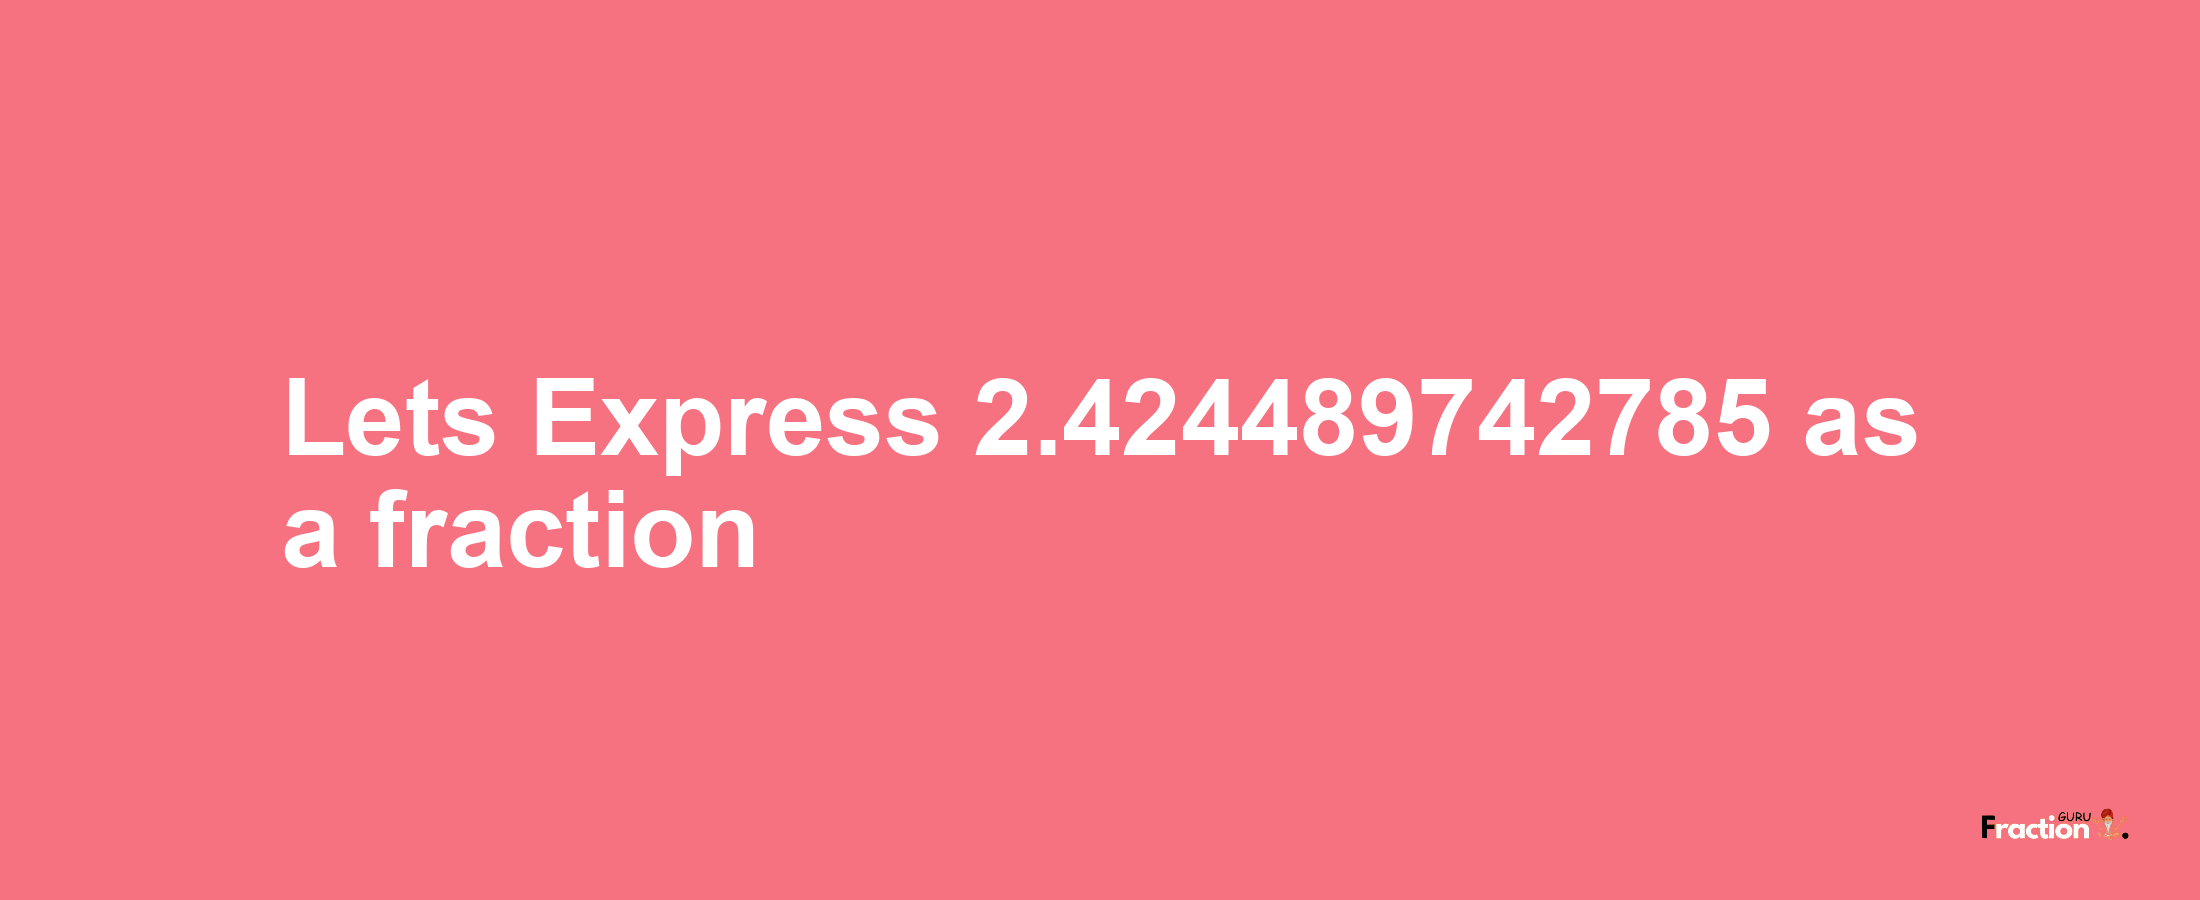 Lets Express 2.424489742785 as afraction